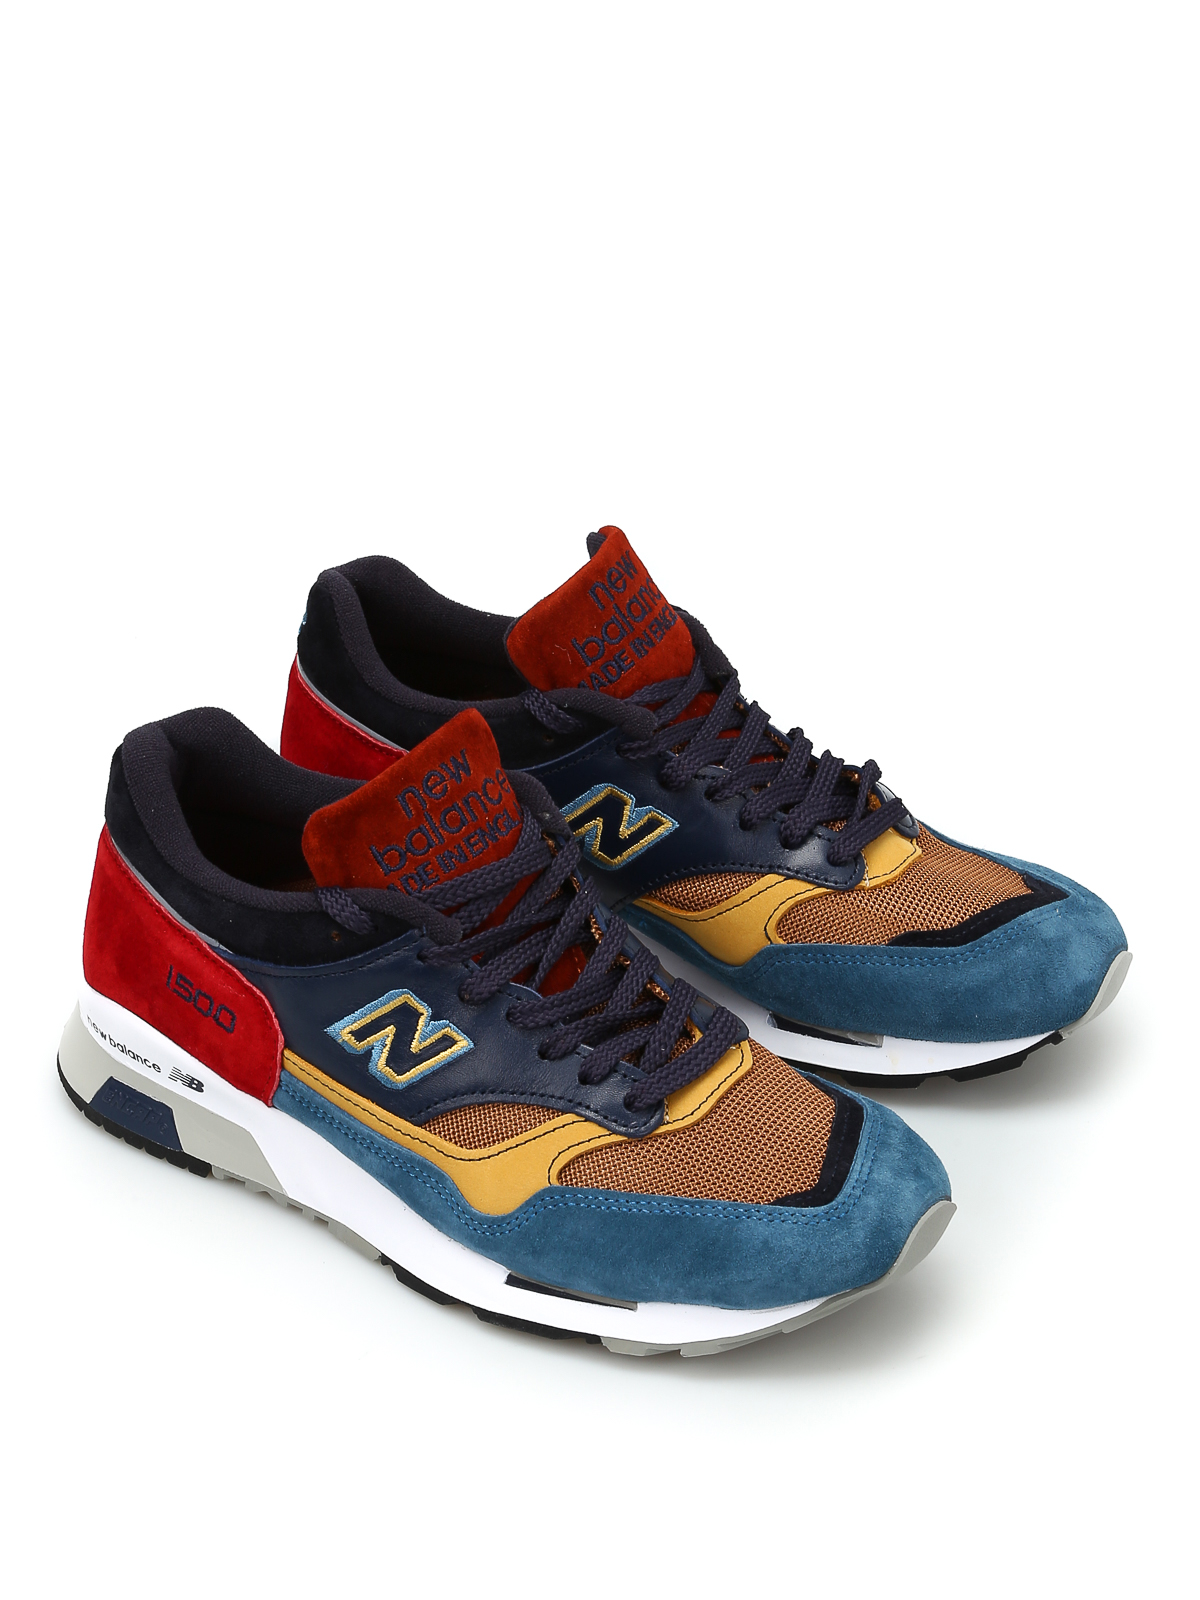 rammelaar oase Hamburger Trainers New Balance - 1500 suede and mesh sneakers - M1500YP